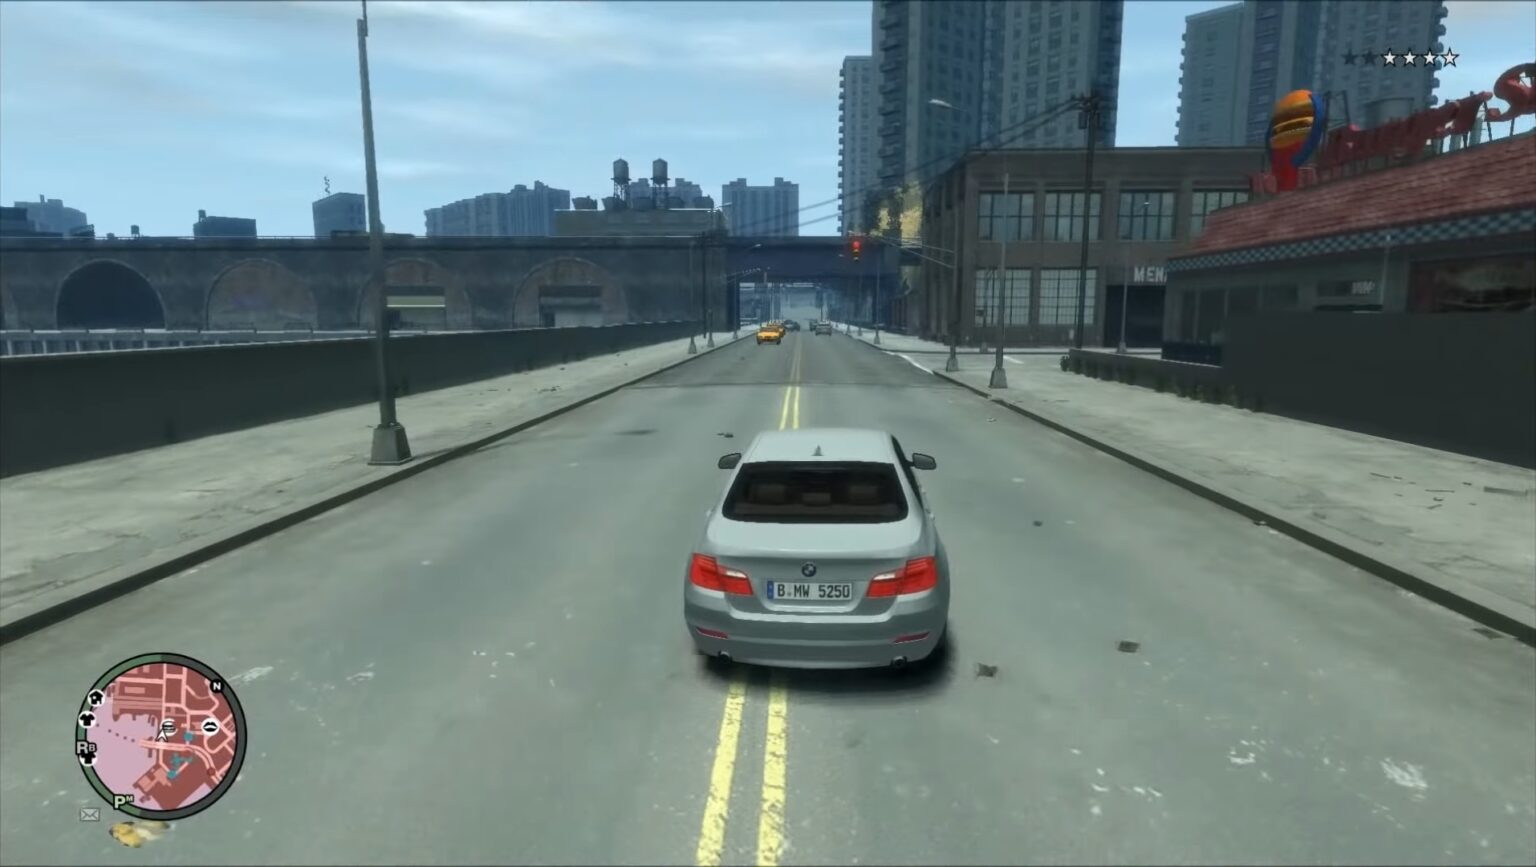 gta 4 highly compressed 4gb file download